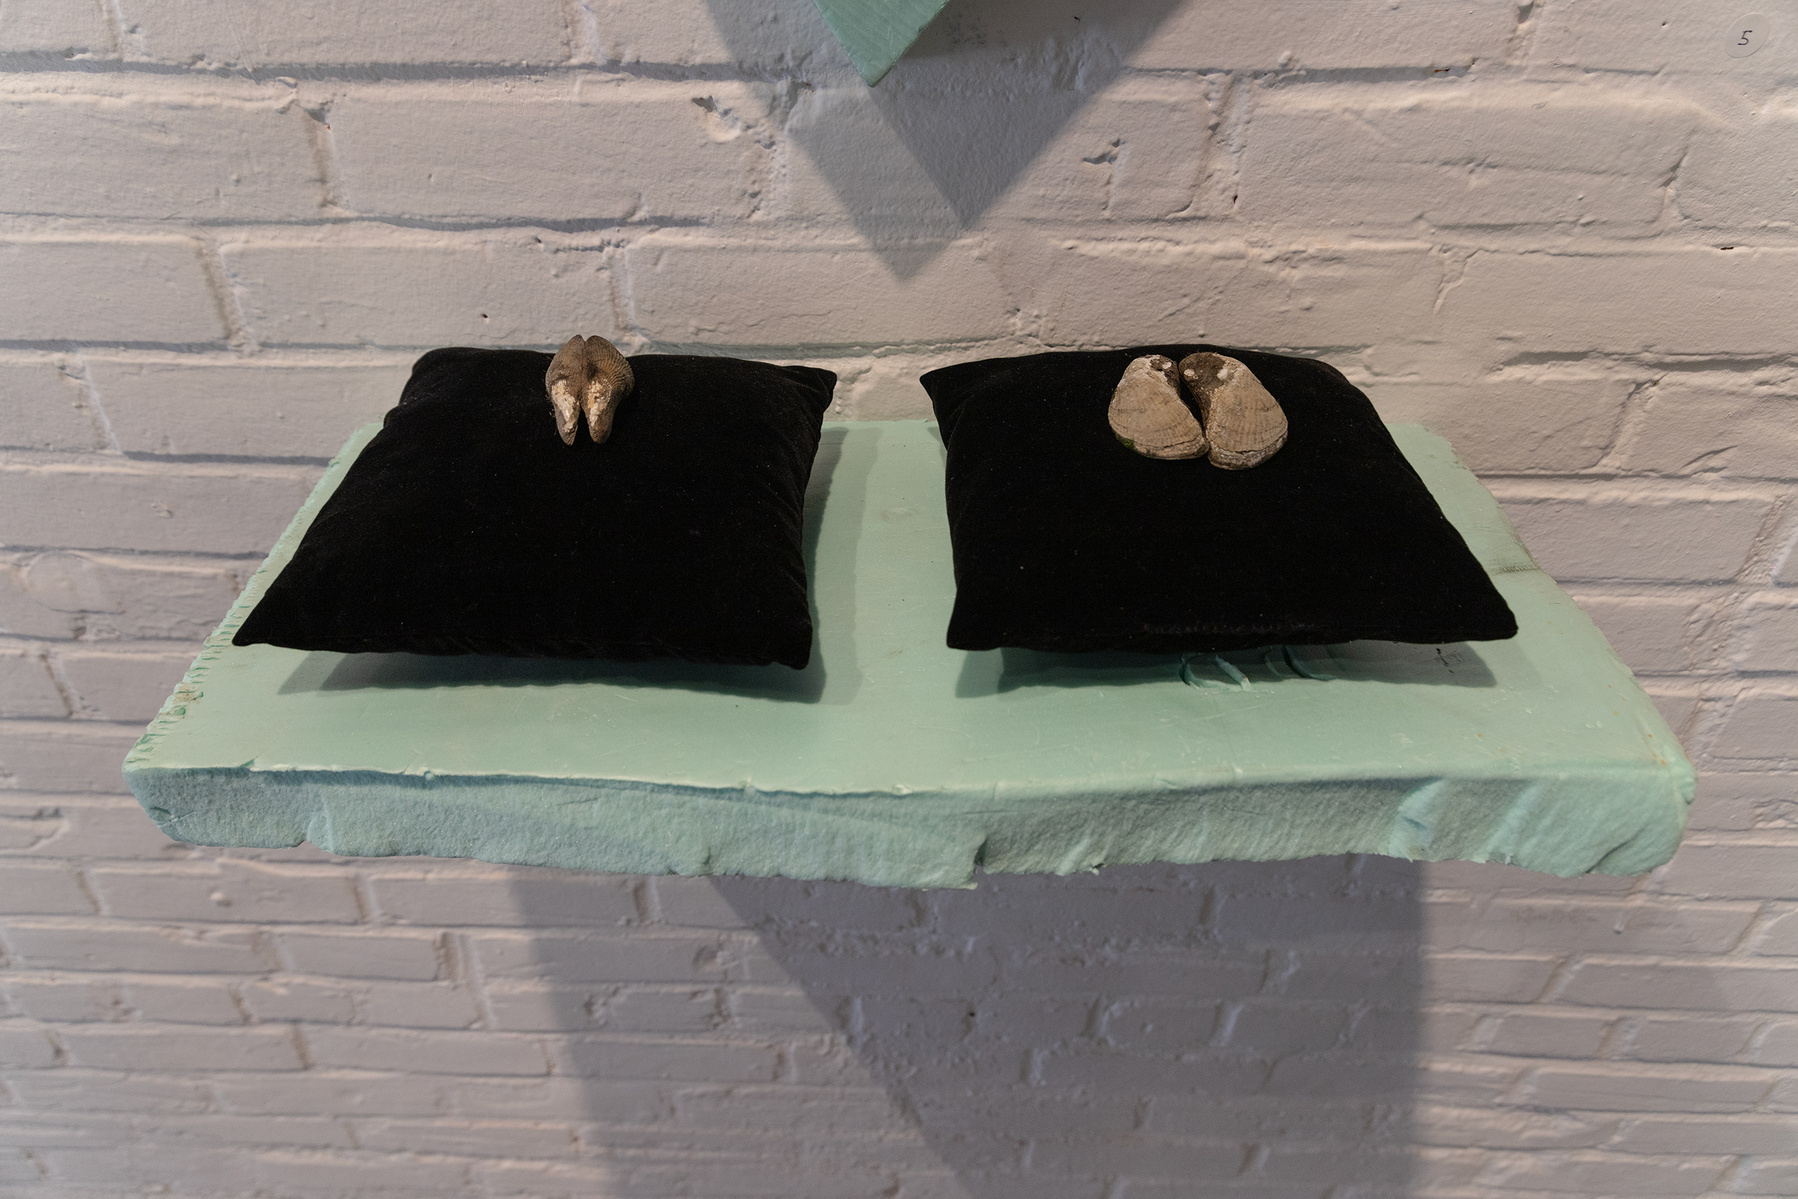 From Priscilla Stadler's SLUDGE, an art project created in response to researching Newtown Creek, a toxic waterway dividing Queens & Brooklyn, NYC. Mussel shells on black velvet pillows set on shelf of light green foam found at Creek